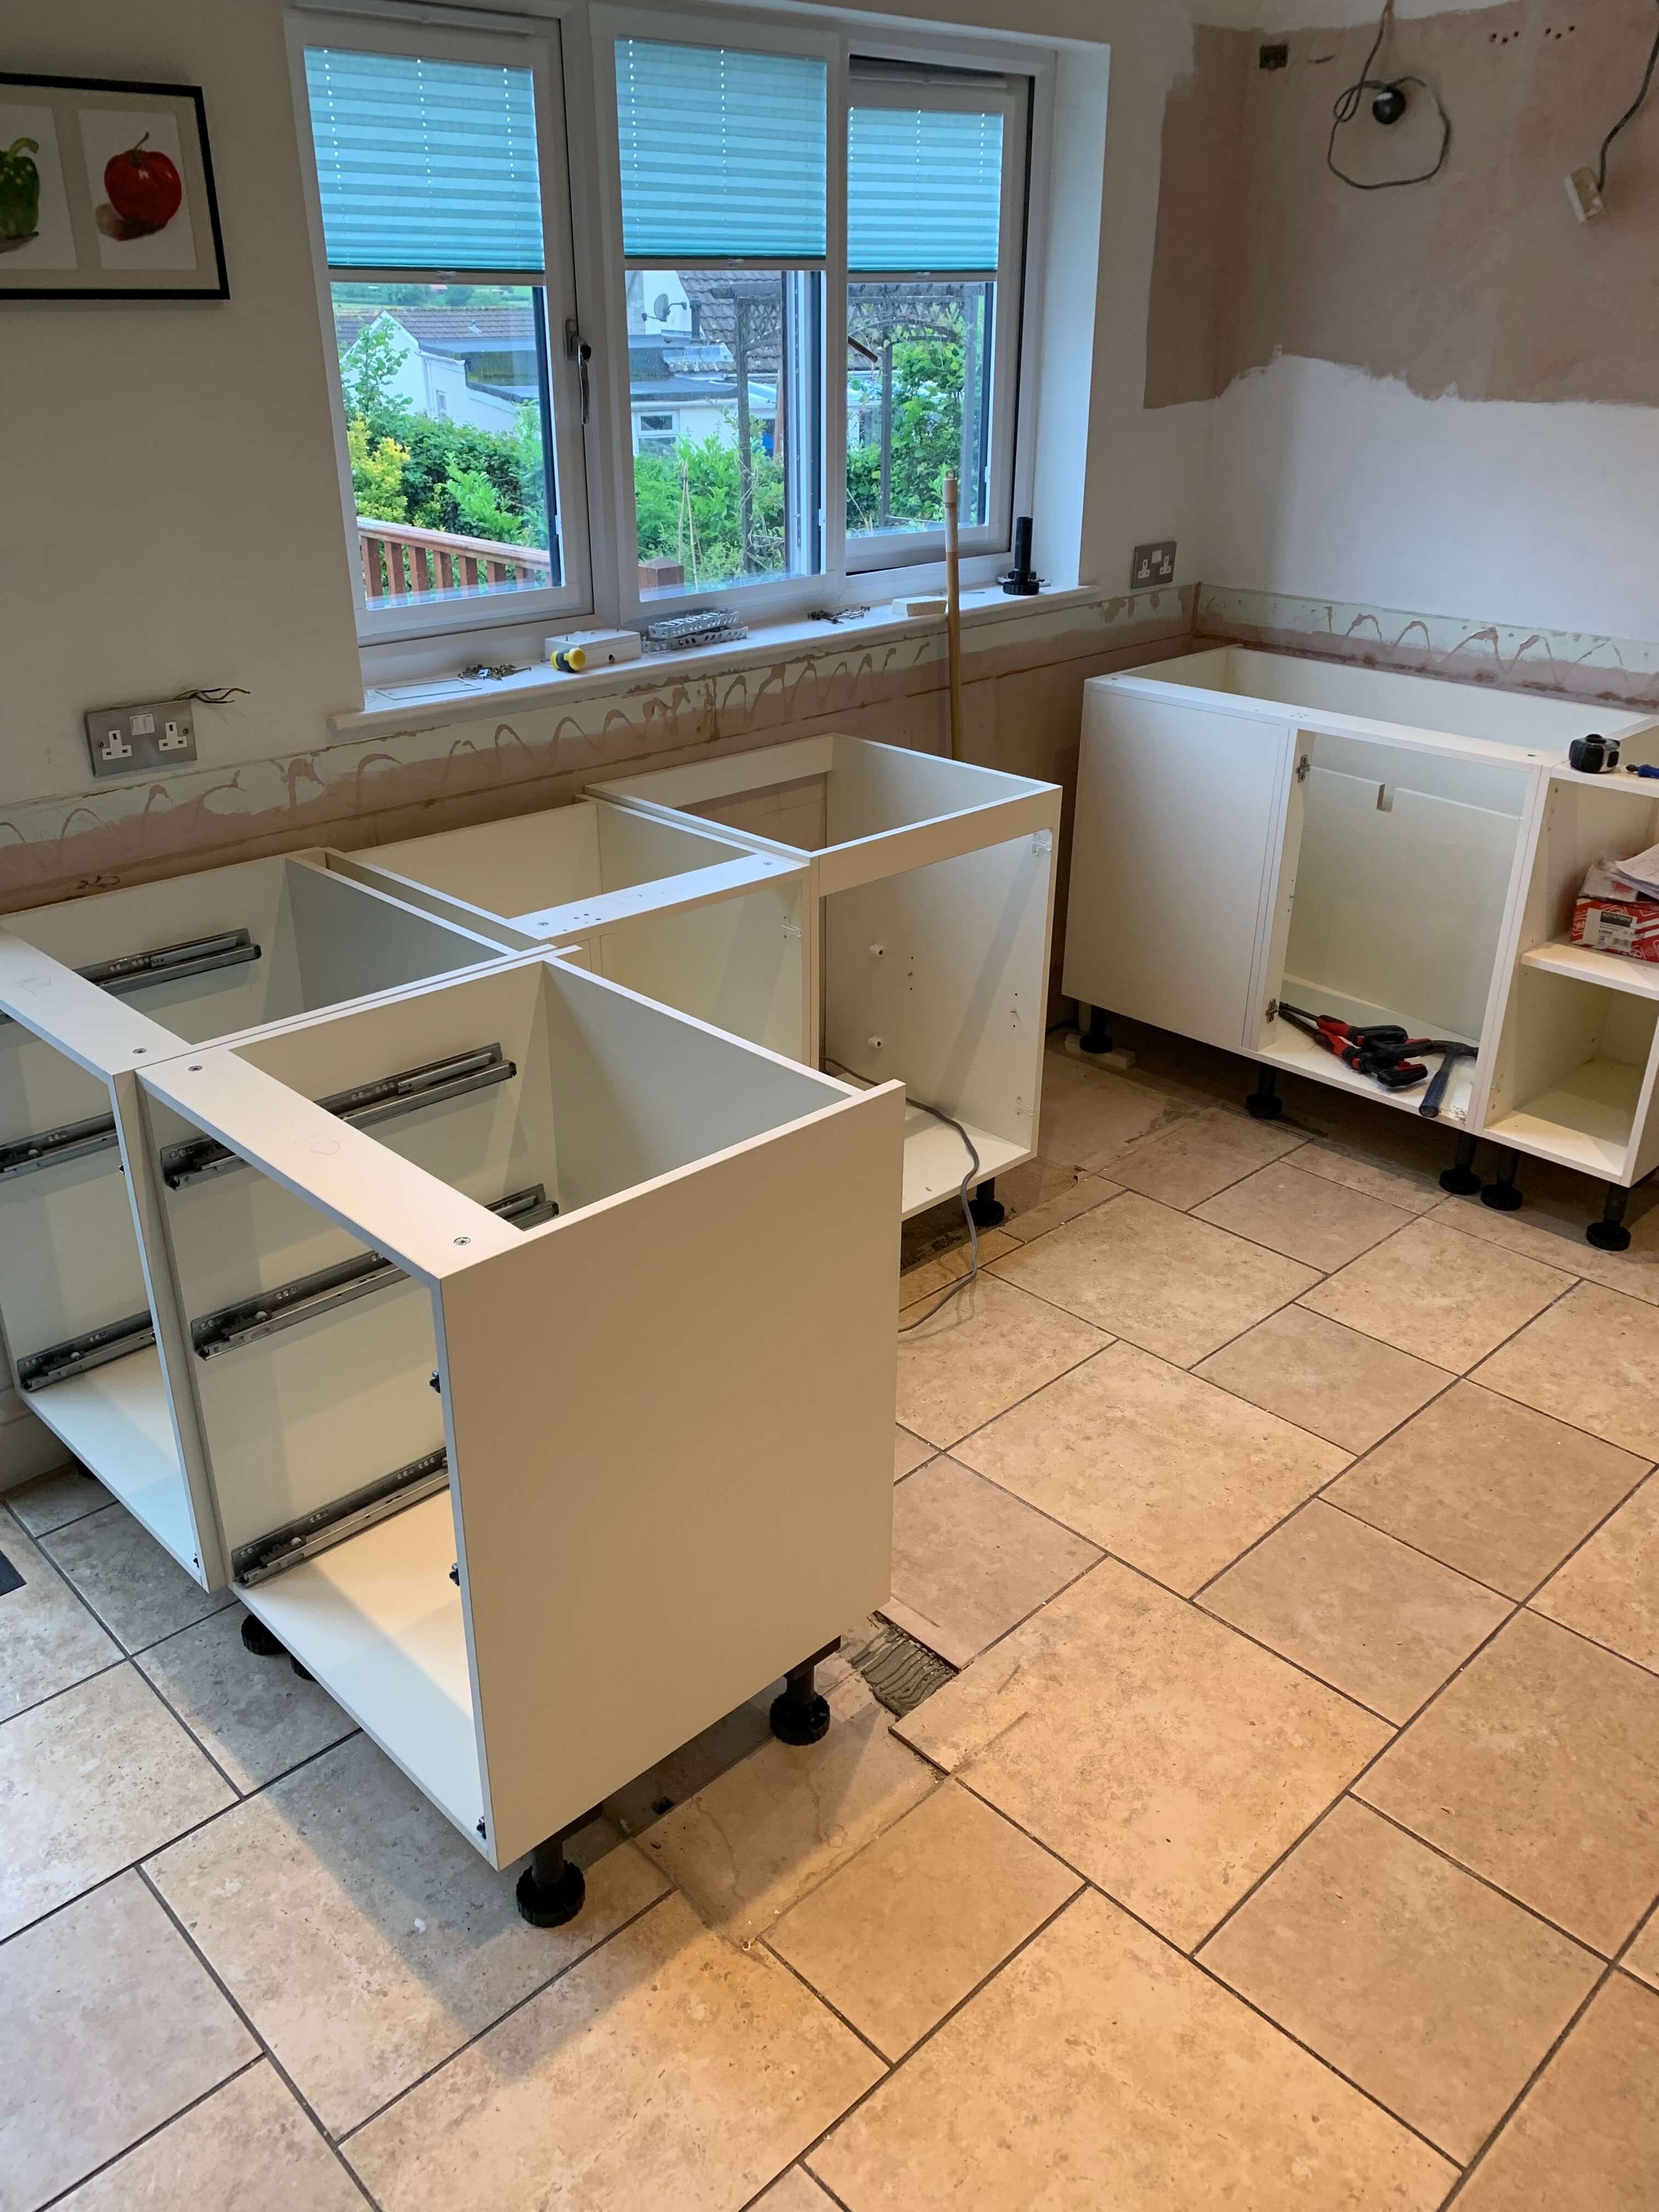 Kitchen units starting to go in